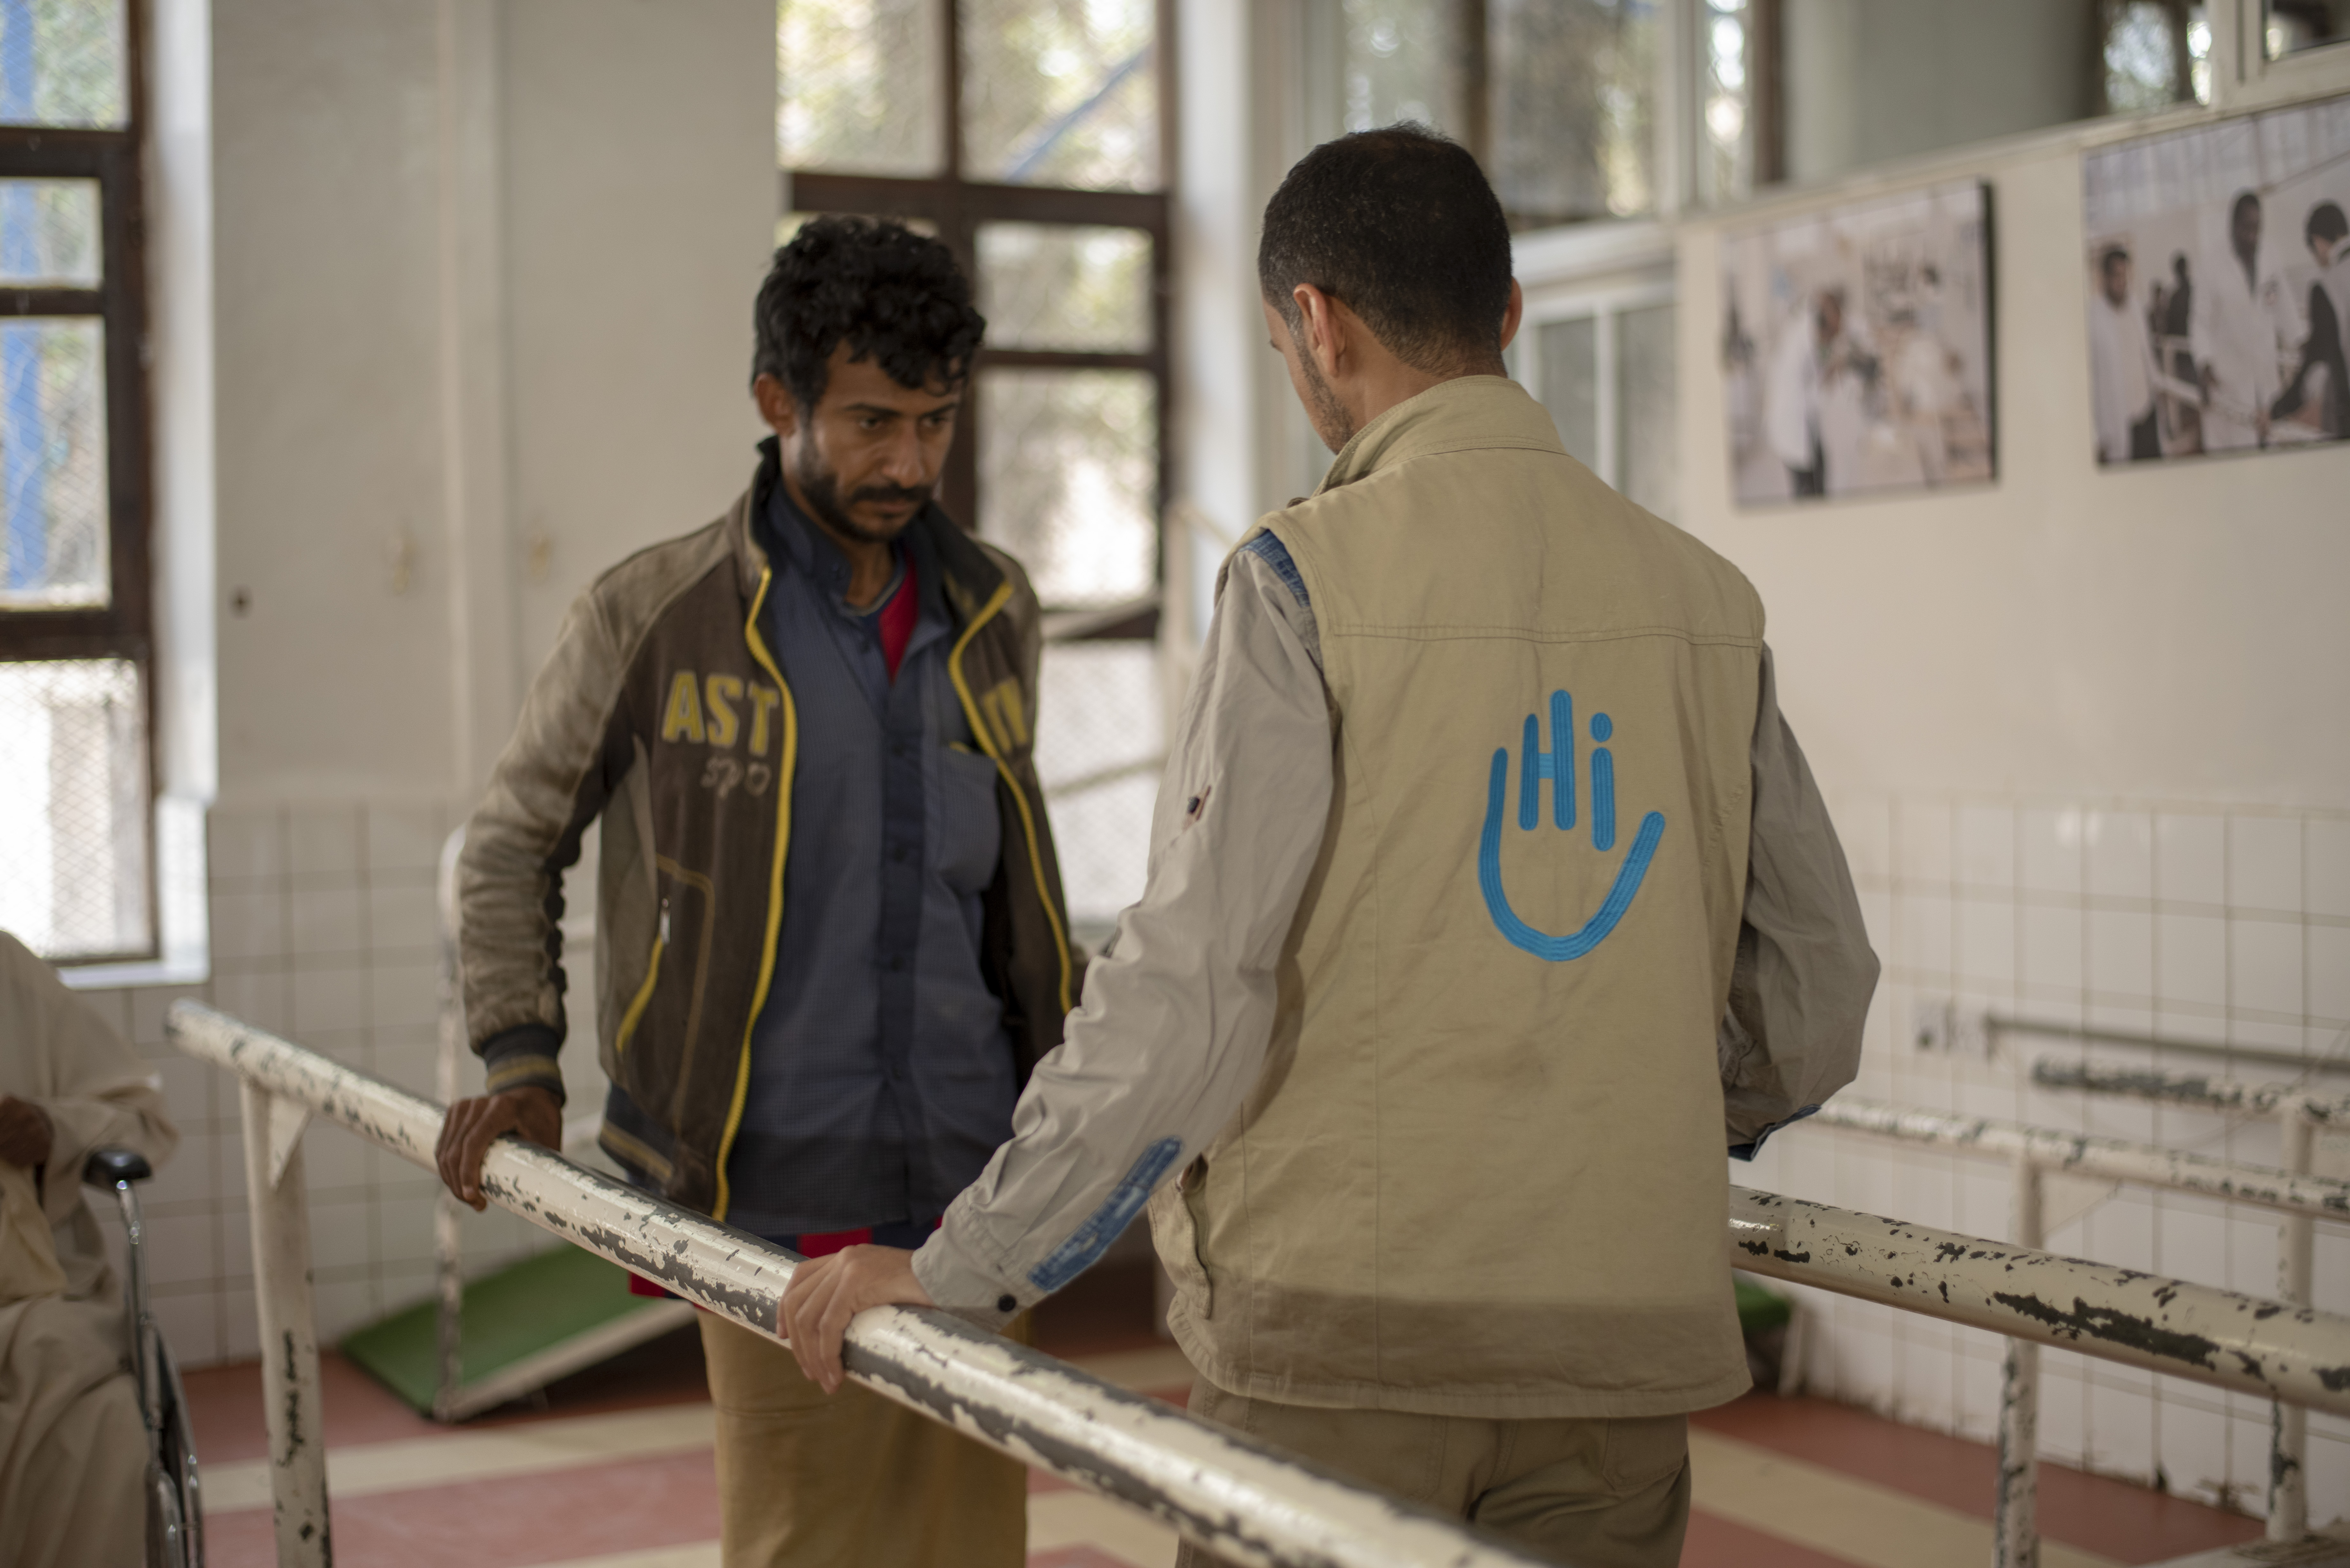 Rehabilitation session with Aiman Al-Mutawaki, a physical therapist who works for HI in the Sana'a center.